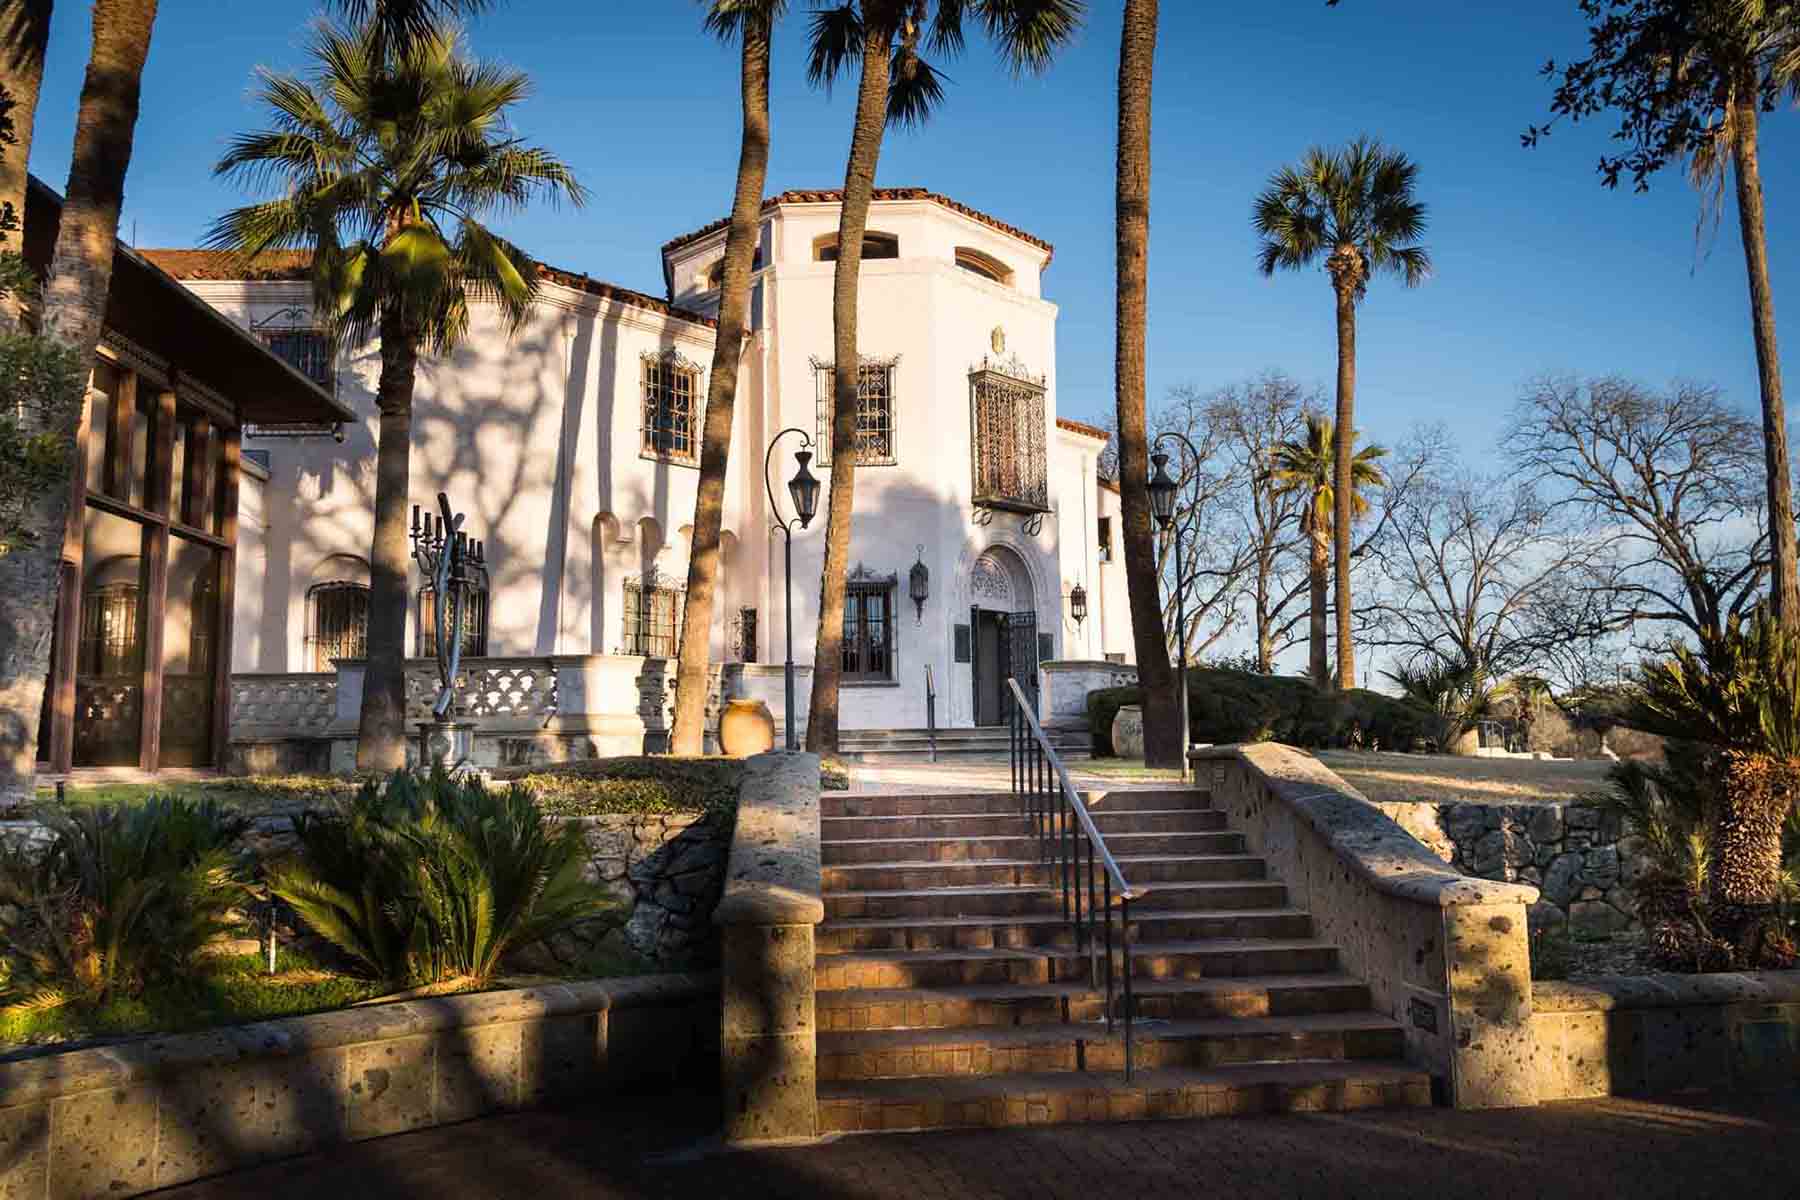 Main house of McNay Art Museum with palm trees and stairs in front for an article on how to take photos at the McNay Art Museum